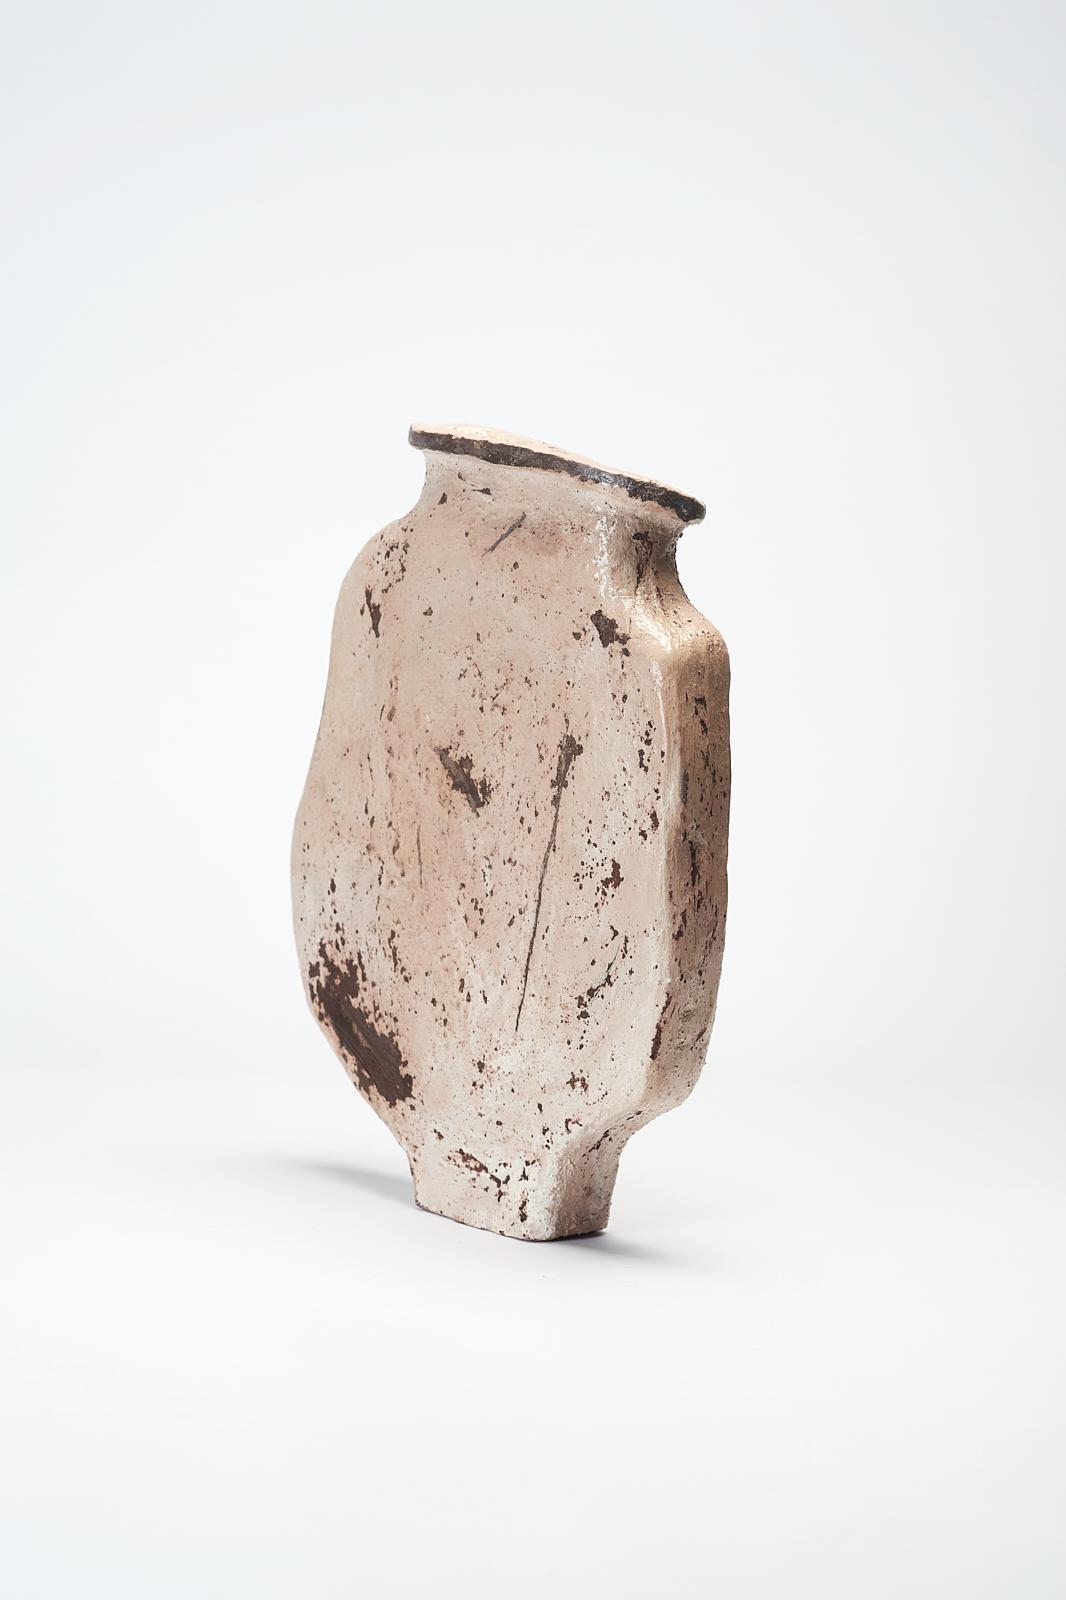 Veda vase by Willem Van Hooff
Core Vessel series
Dimensions: W 29 x H 37 cm
Materials: Earthenware, ceramic, pigments and glaze

Core is a series of flat vessels inspired by Prehistoric African building techniques. Willem has been fascinated by